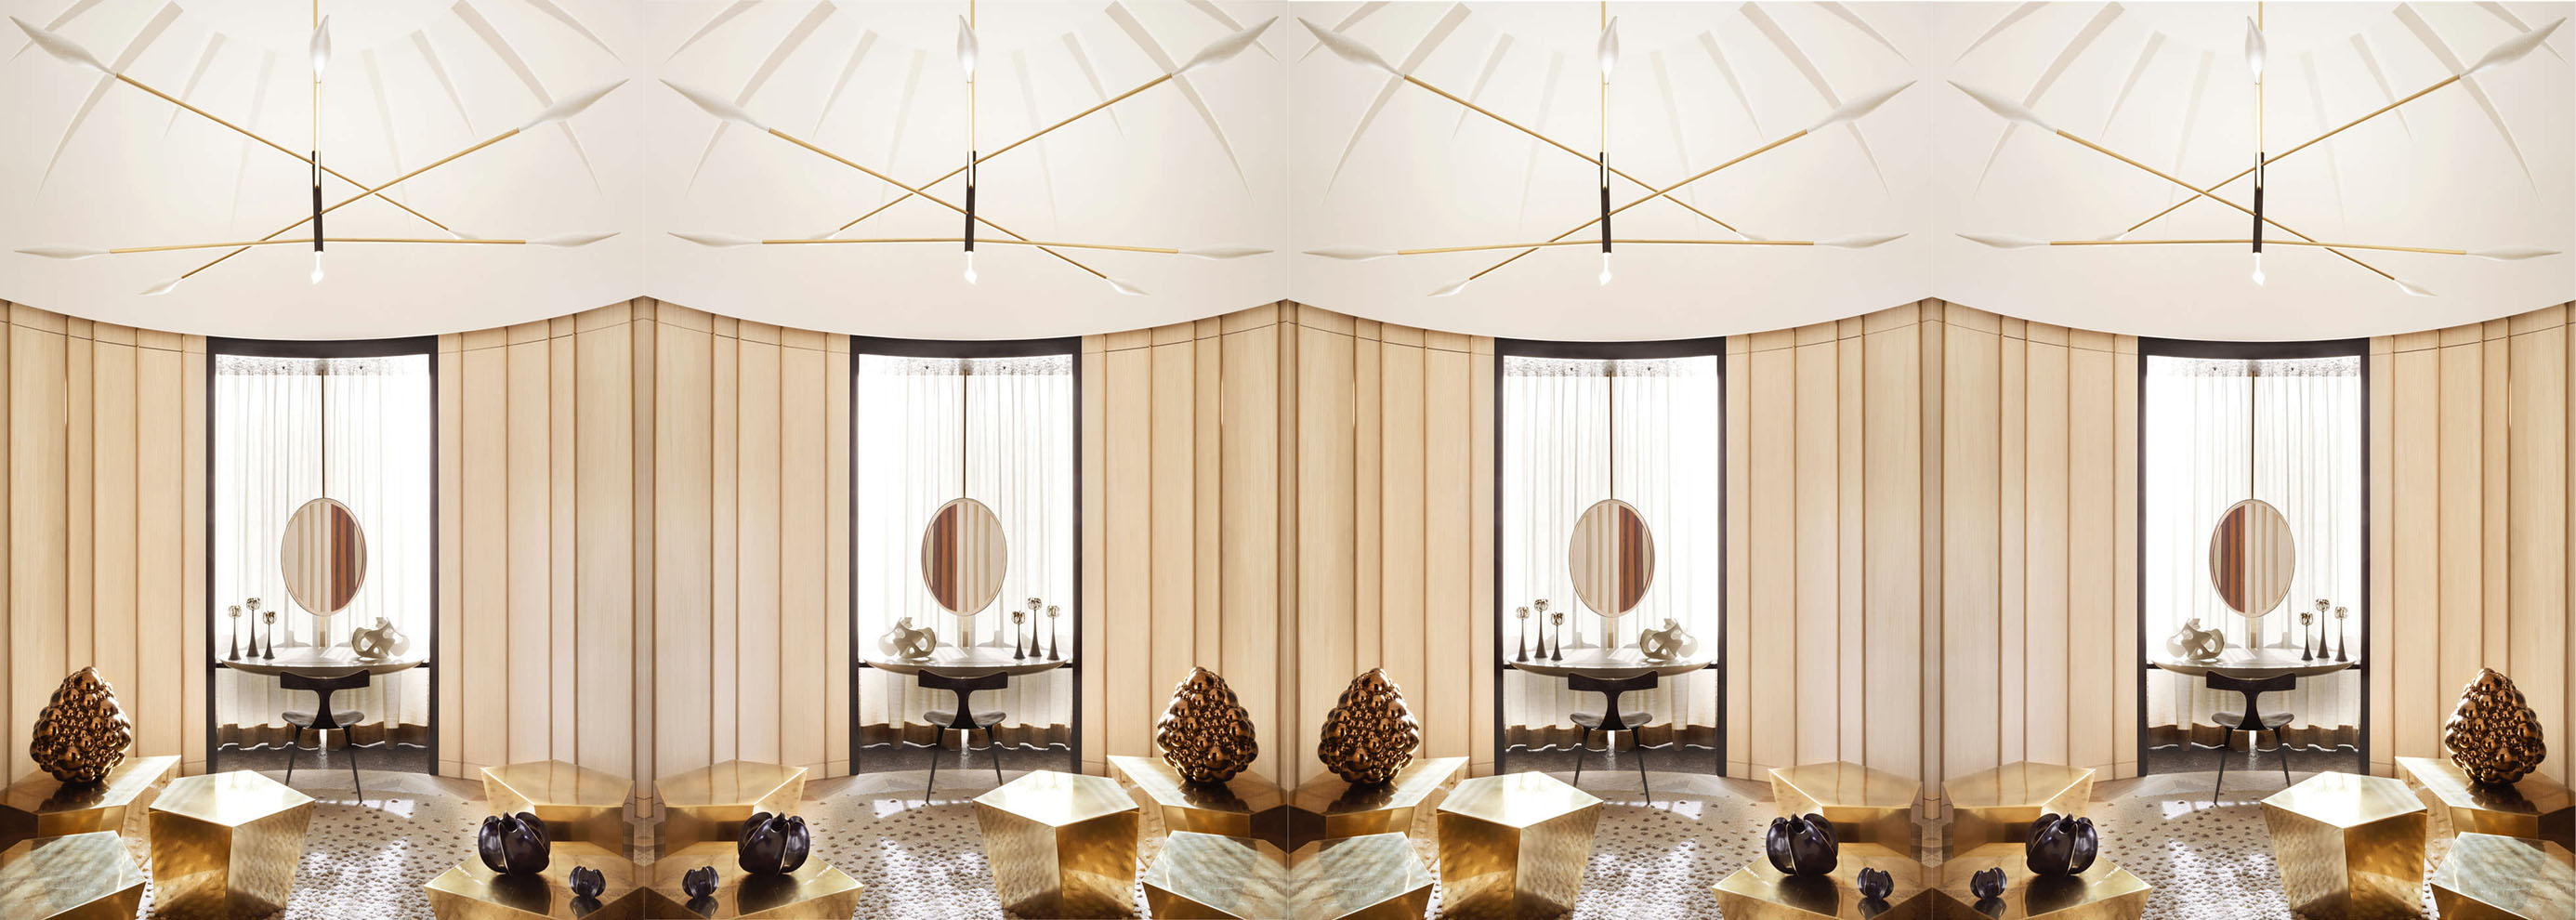 Subtle elegance and warm moments of light take form in the Park Hyatt Los Angeles' Sales Gallery.